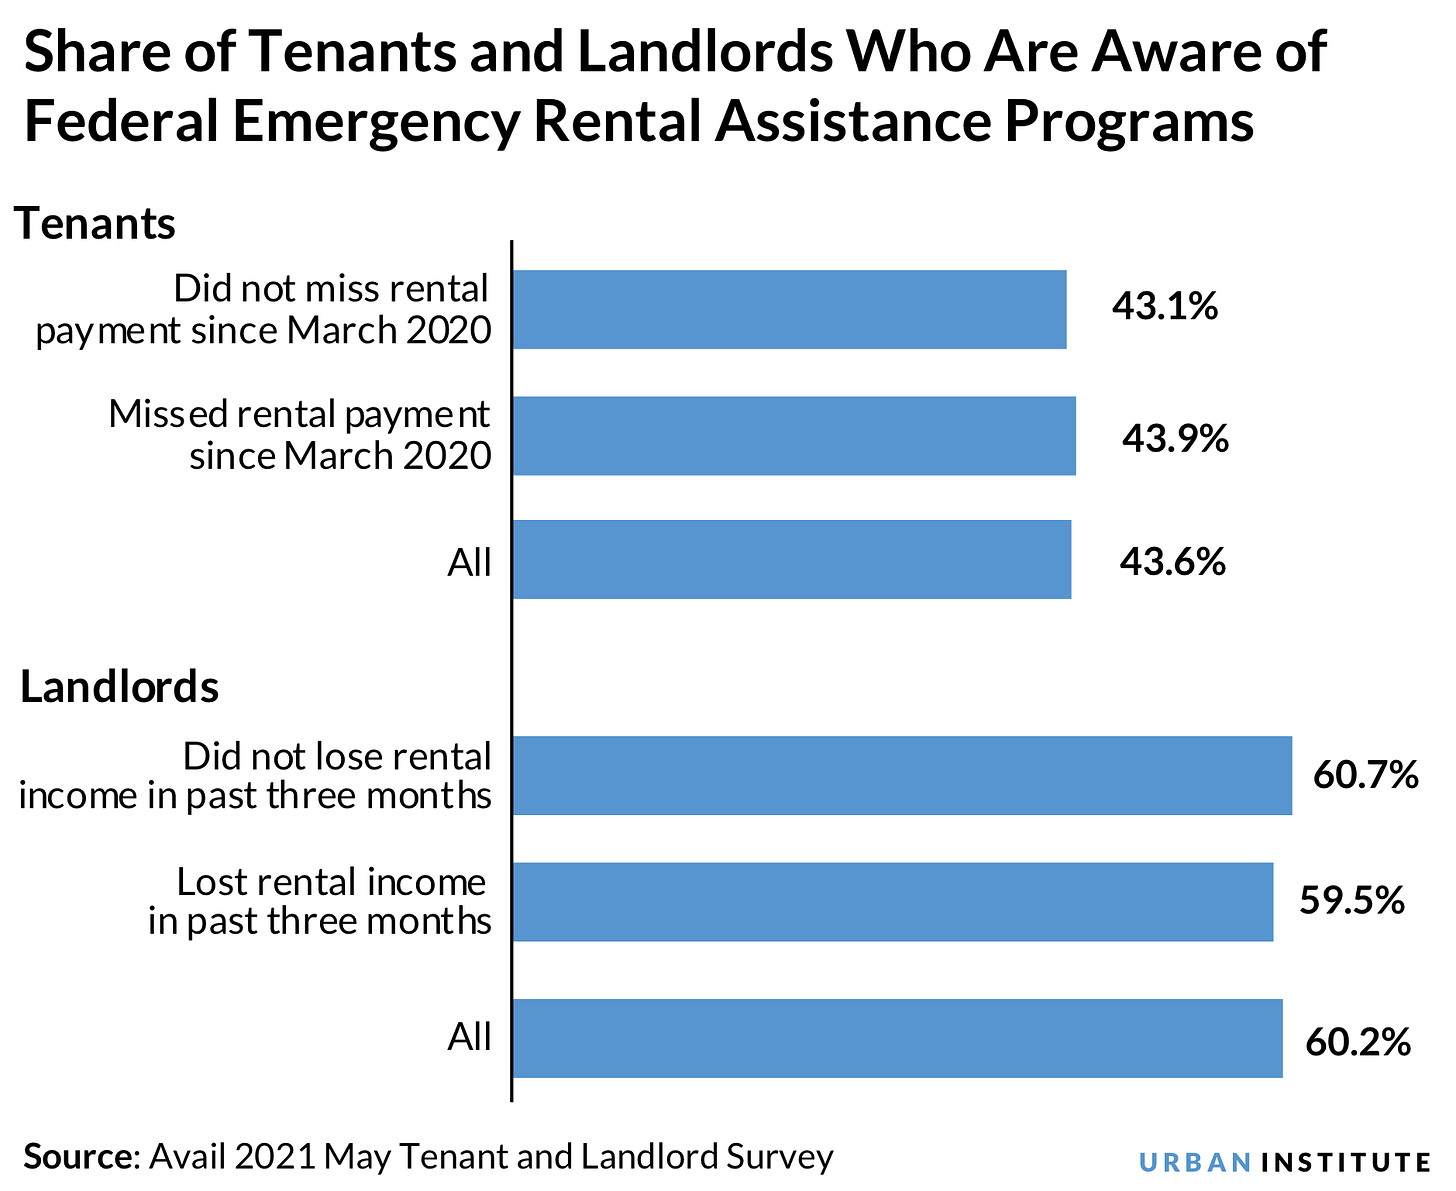 Bar chart showing the share of renters and mom-and-pop landlords who are aware of federal emergency rental assistance programs